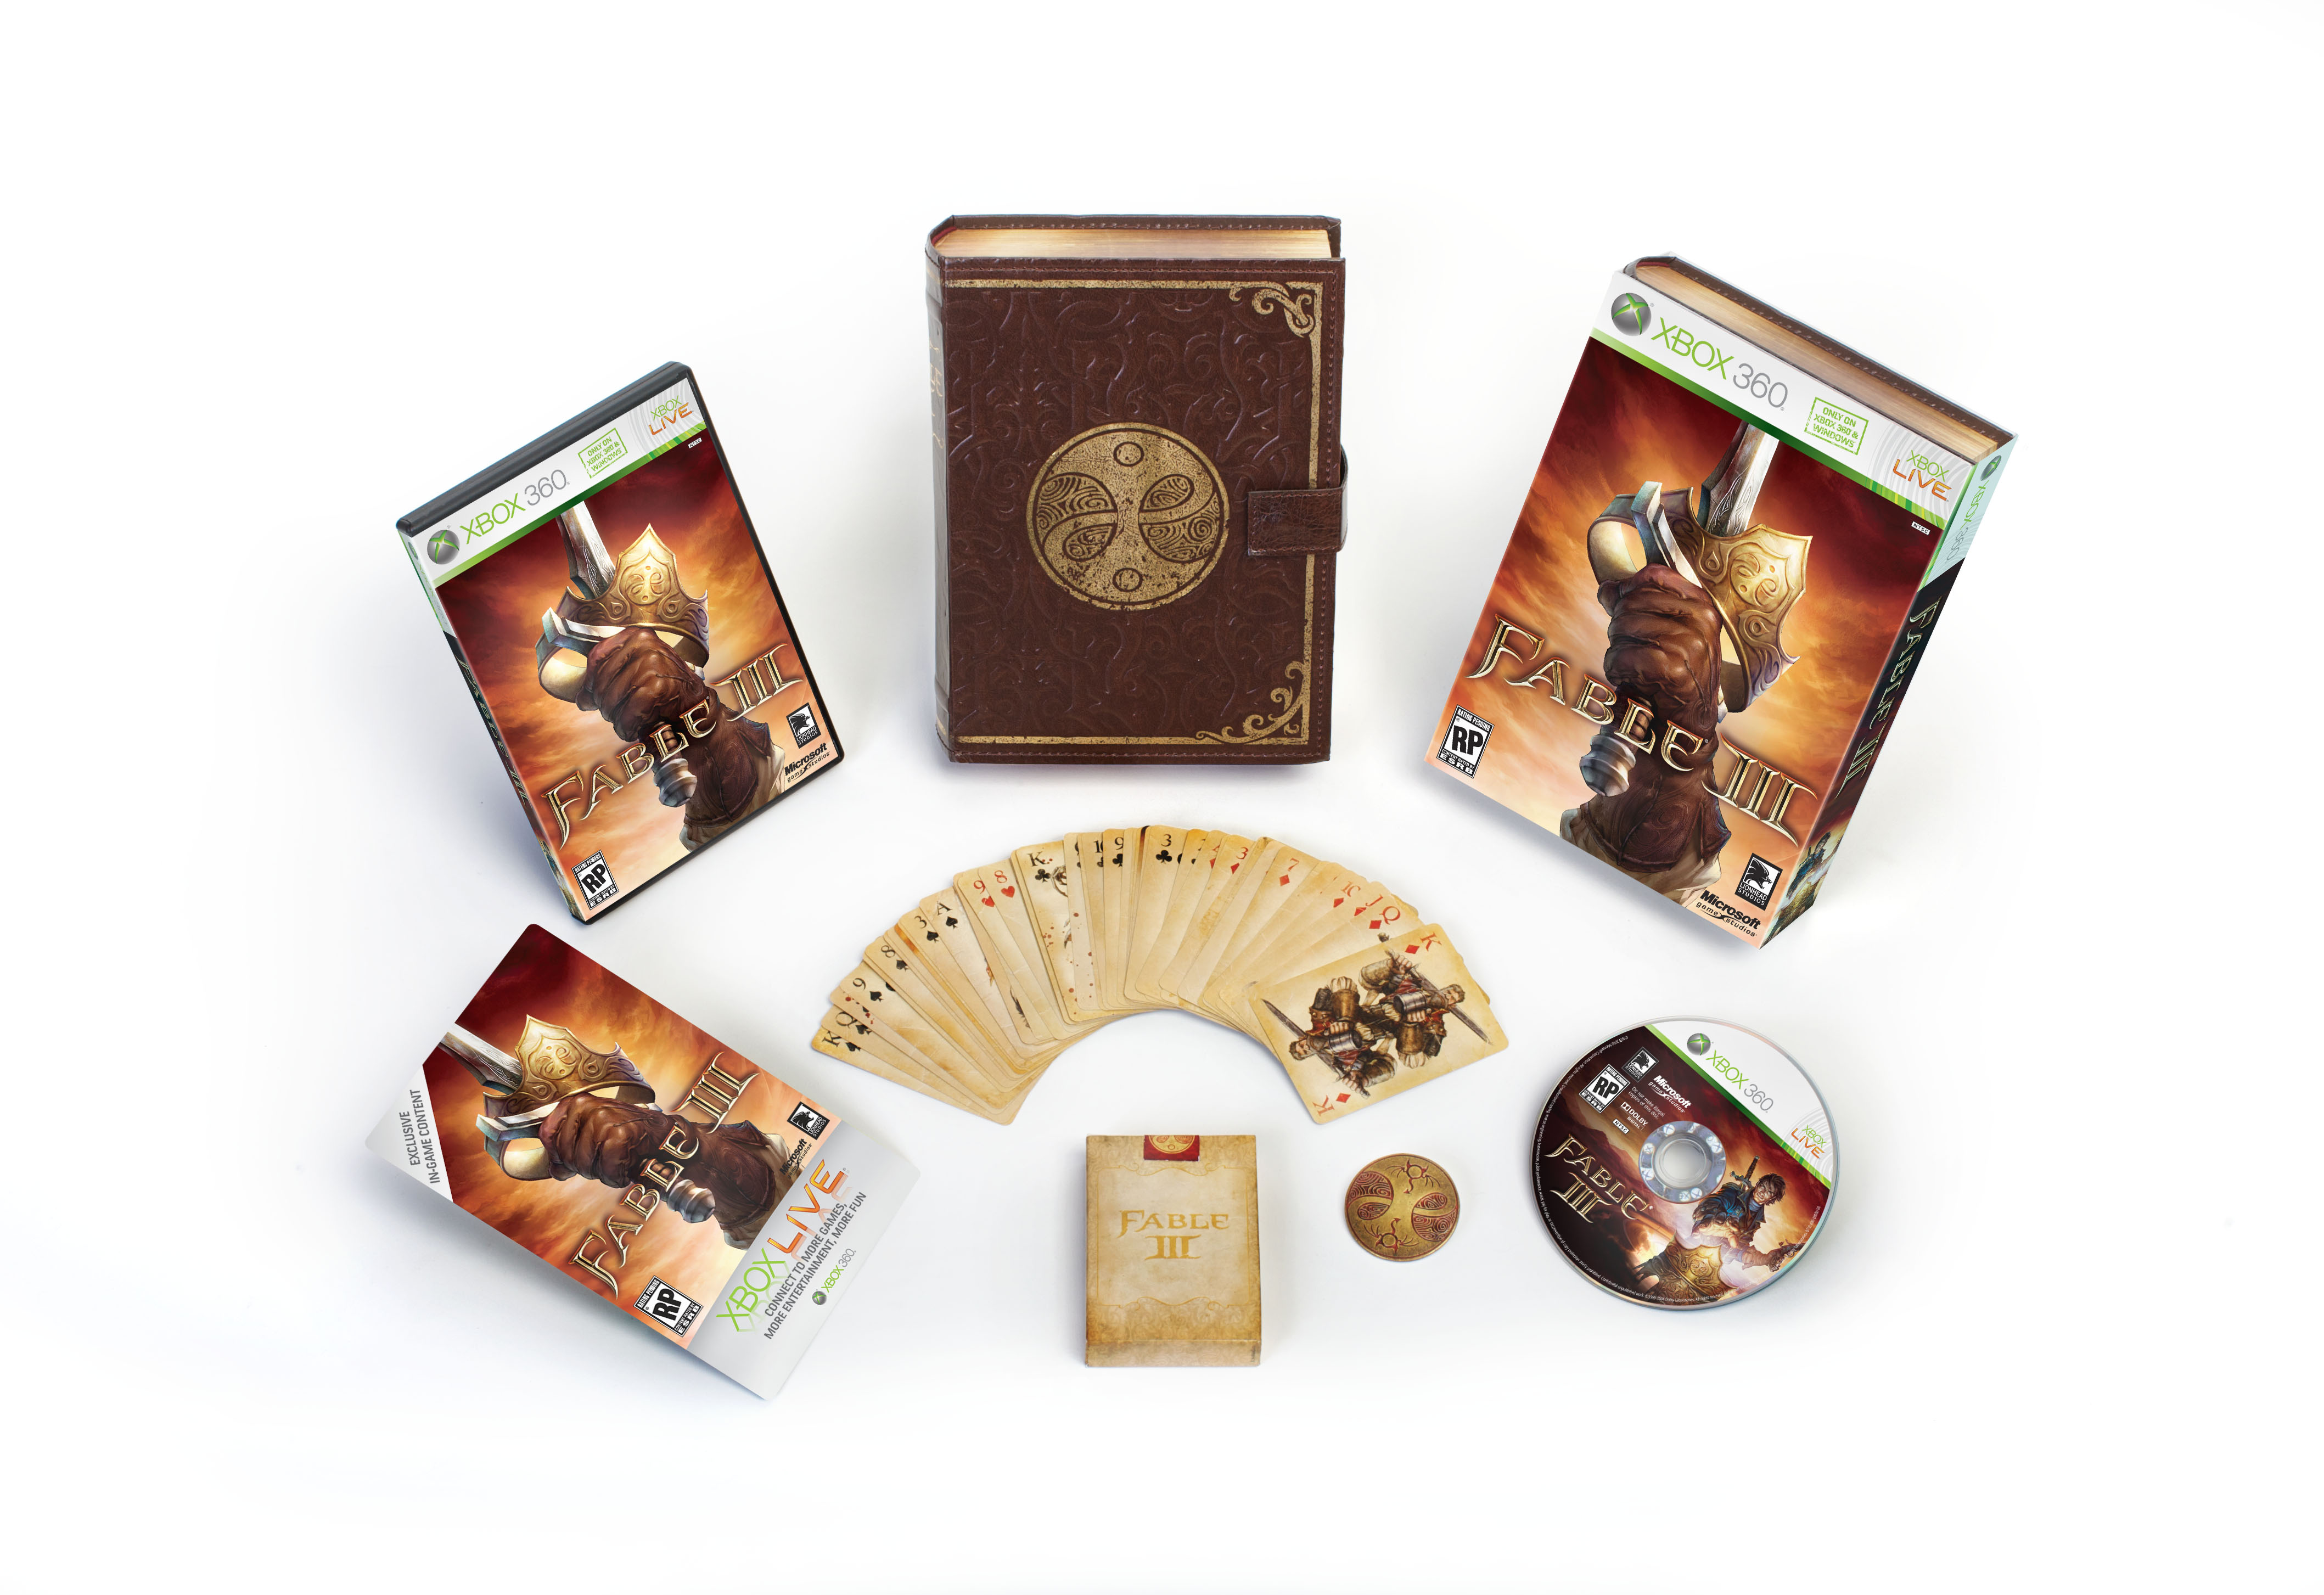 Fable III Xbox LCE Contents Closed